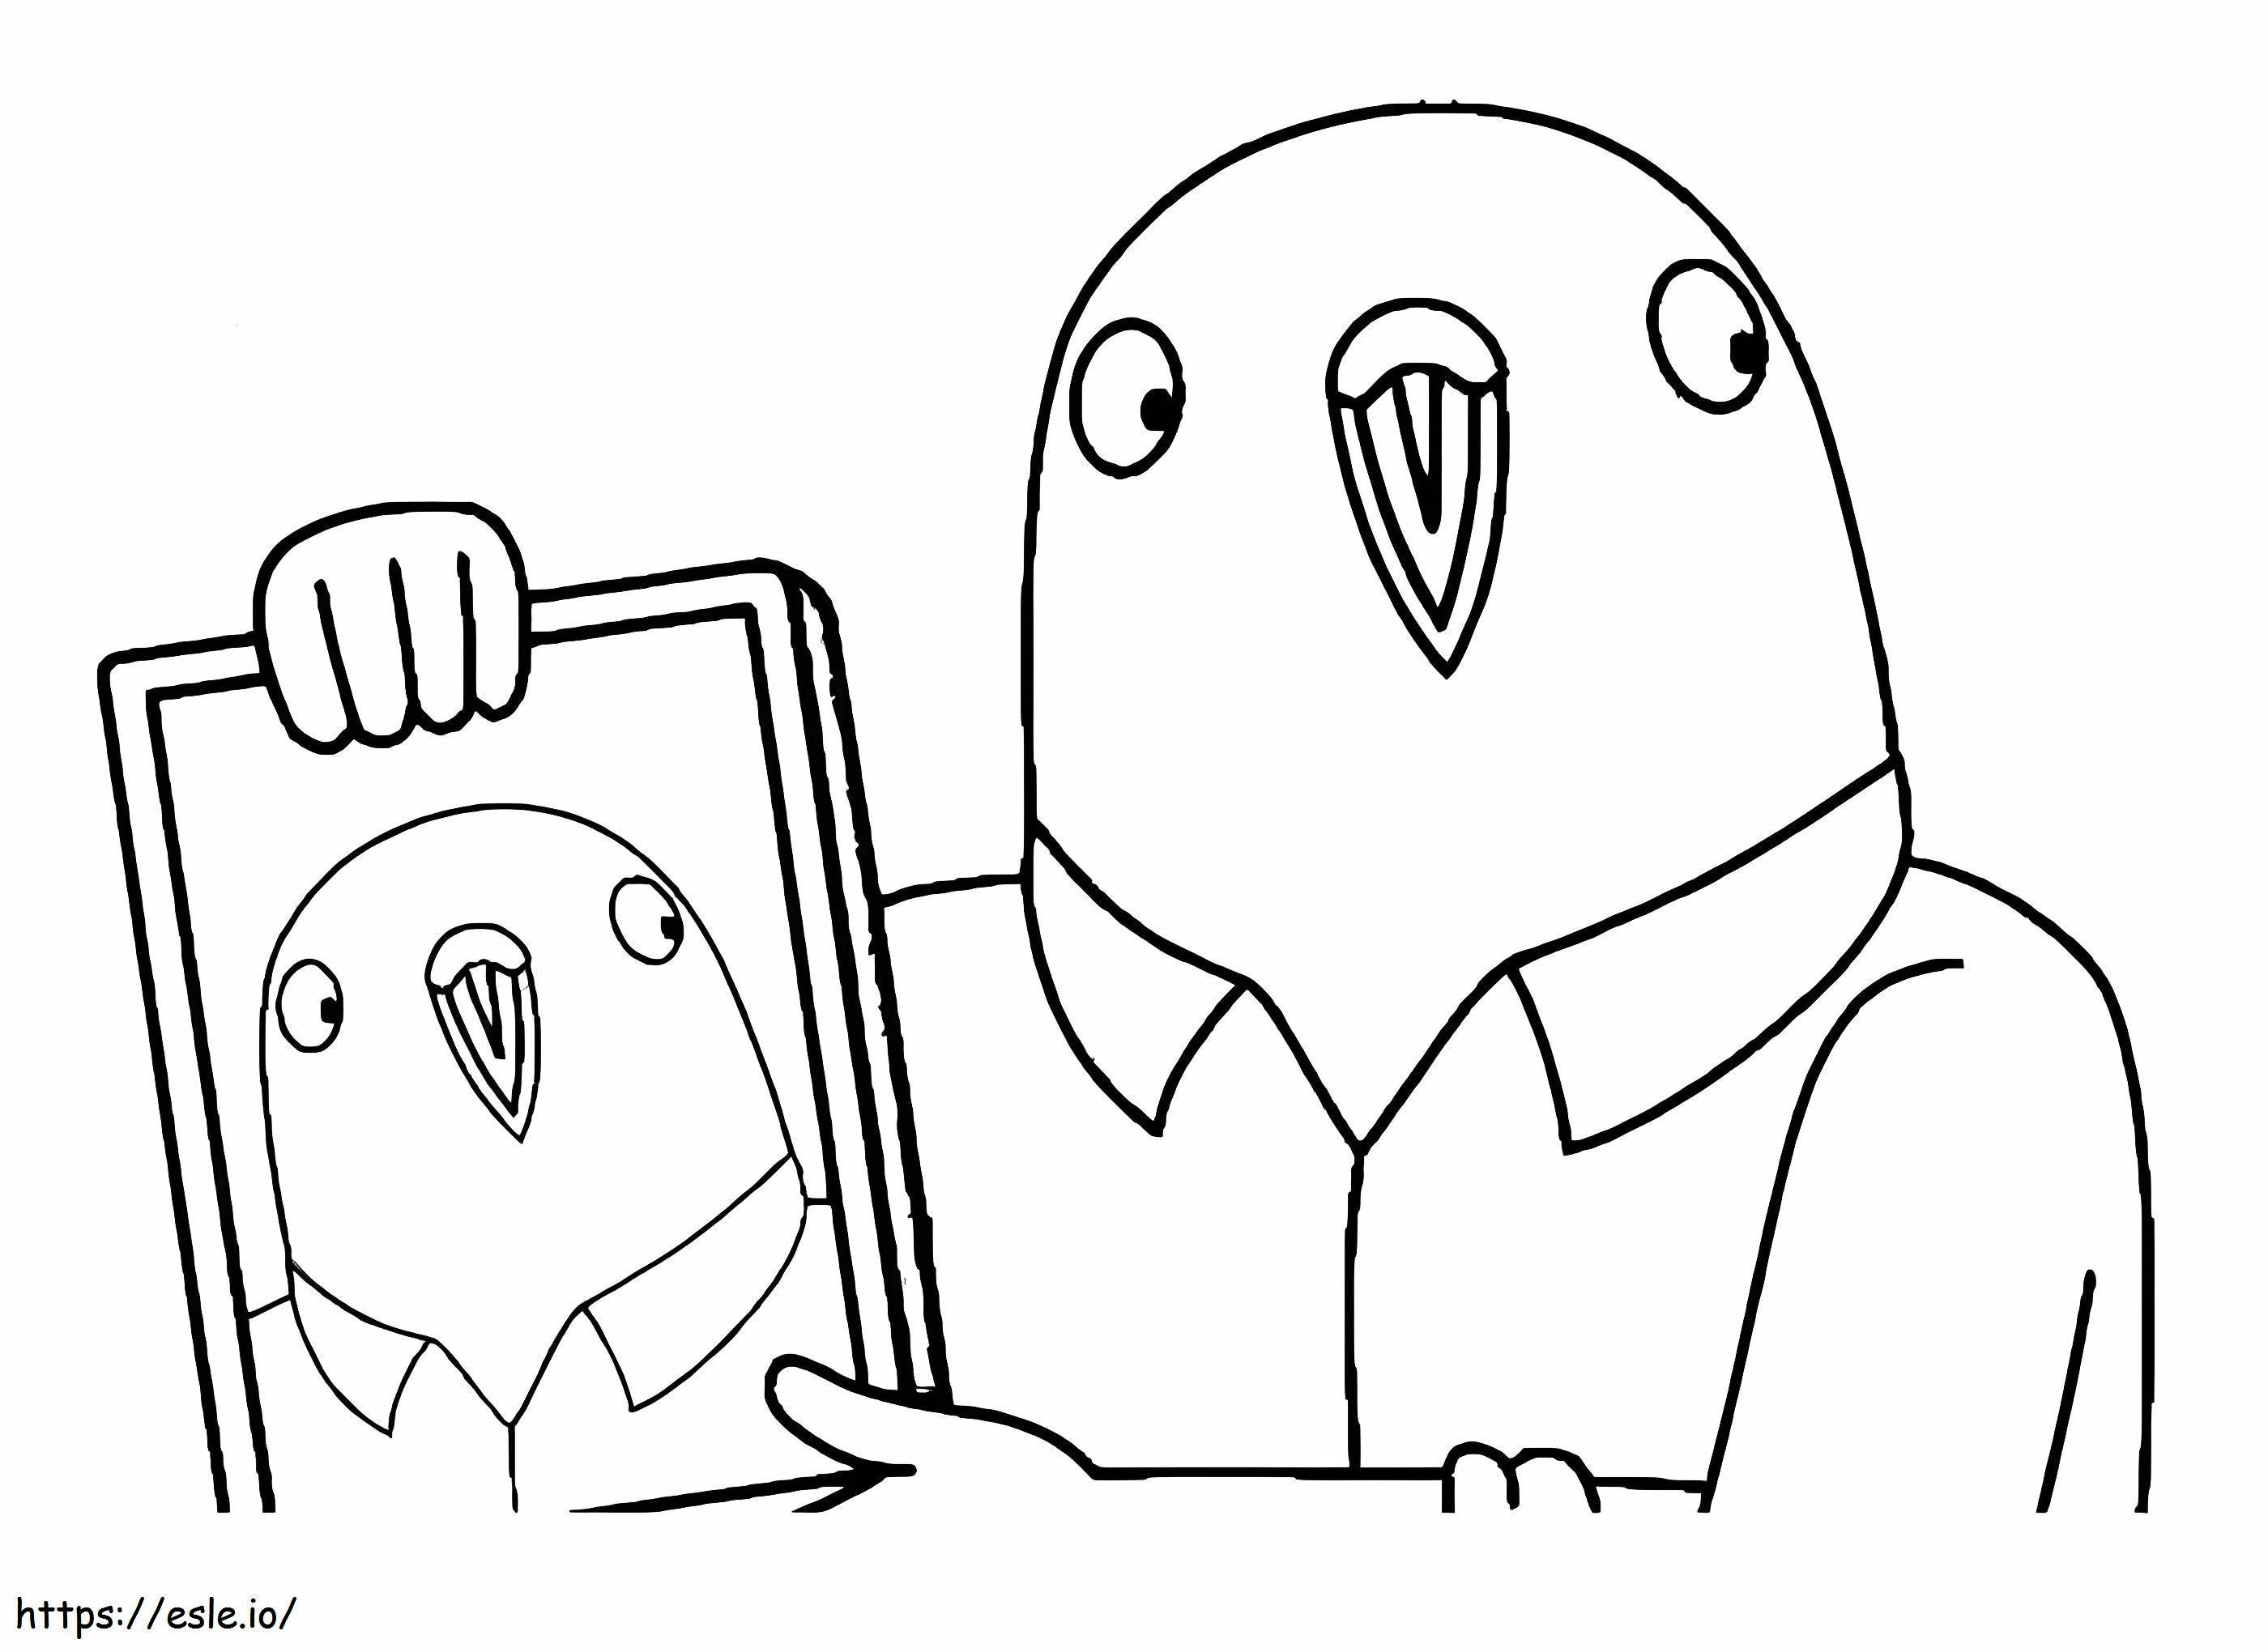 Speckle From Tuca And Bertie coloring page